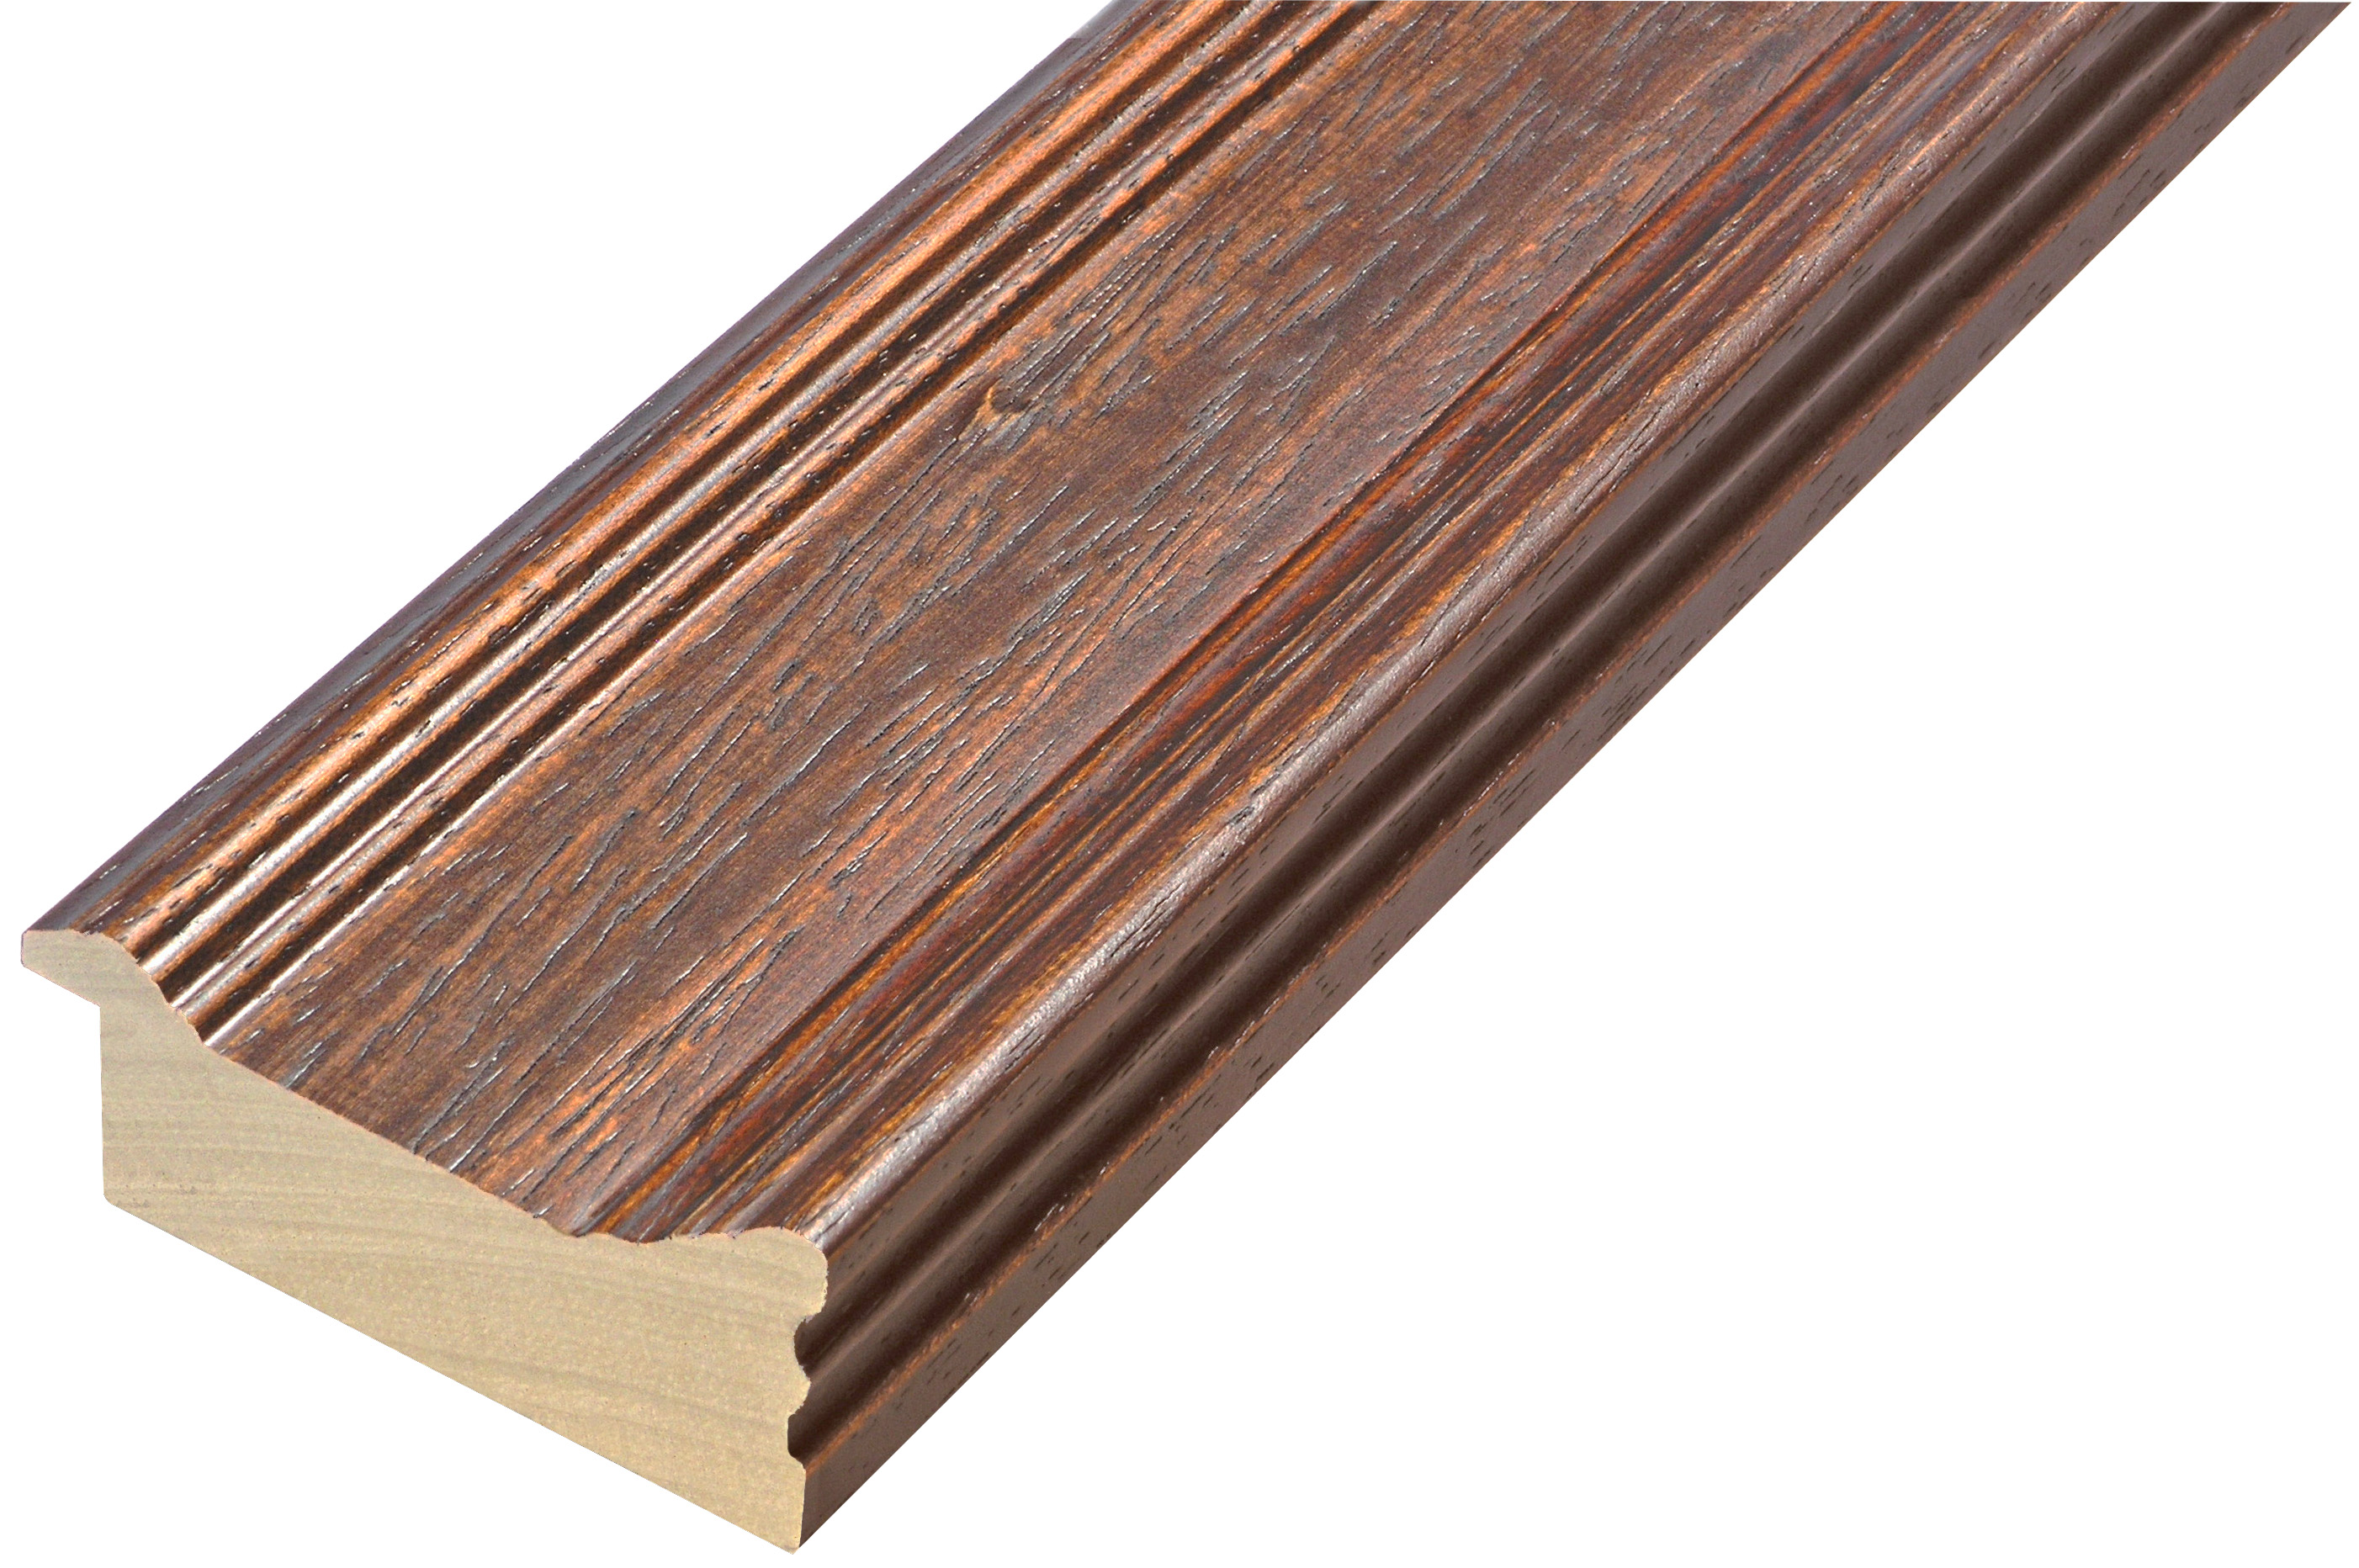 Moulding ayous jointed width 68mm height 30 - Wallnut finish - 573NOCE